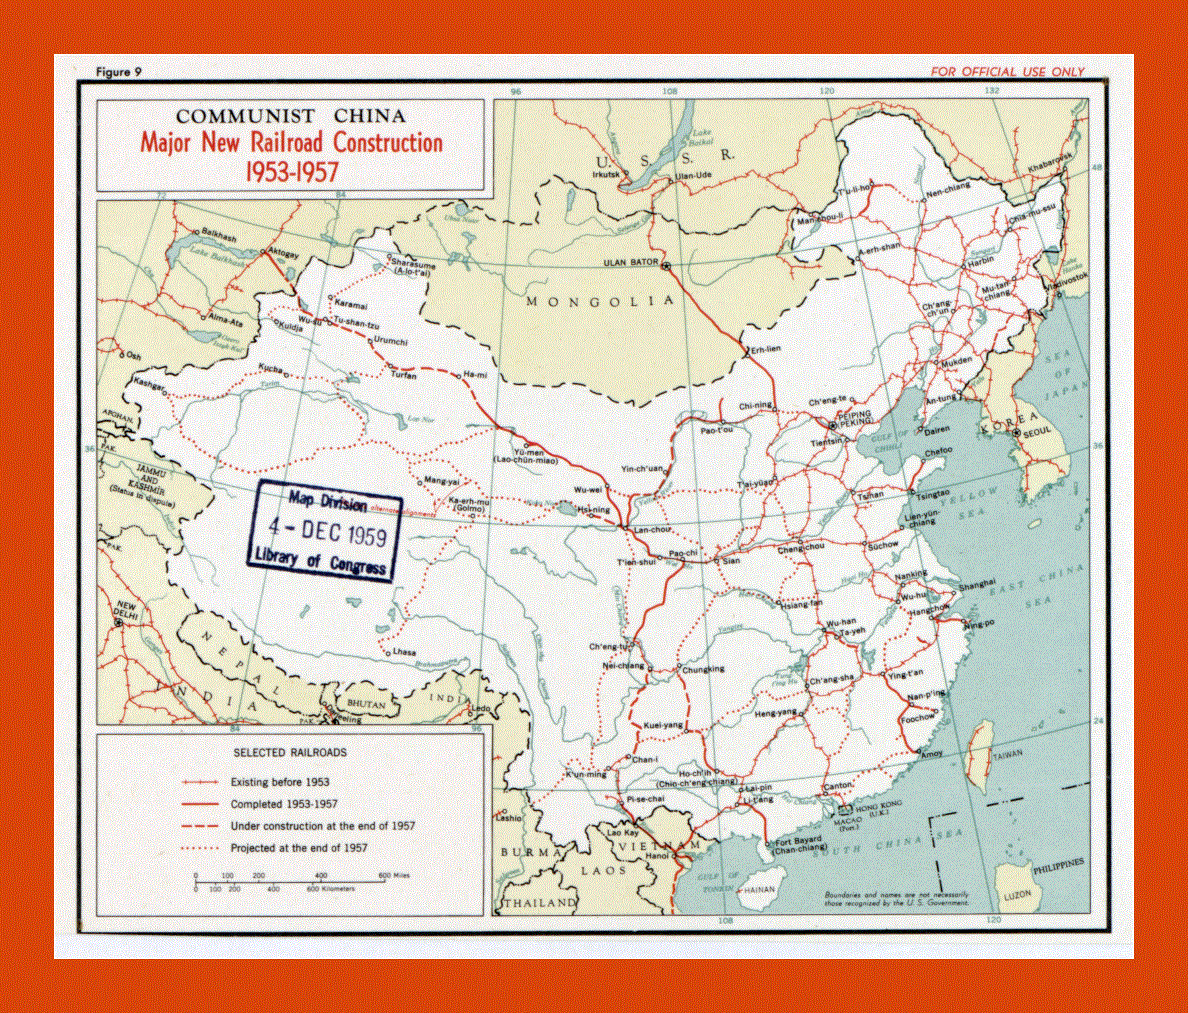 Major new railroad construction map of Communist China - 1953 1957